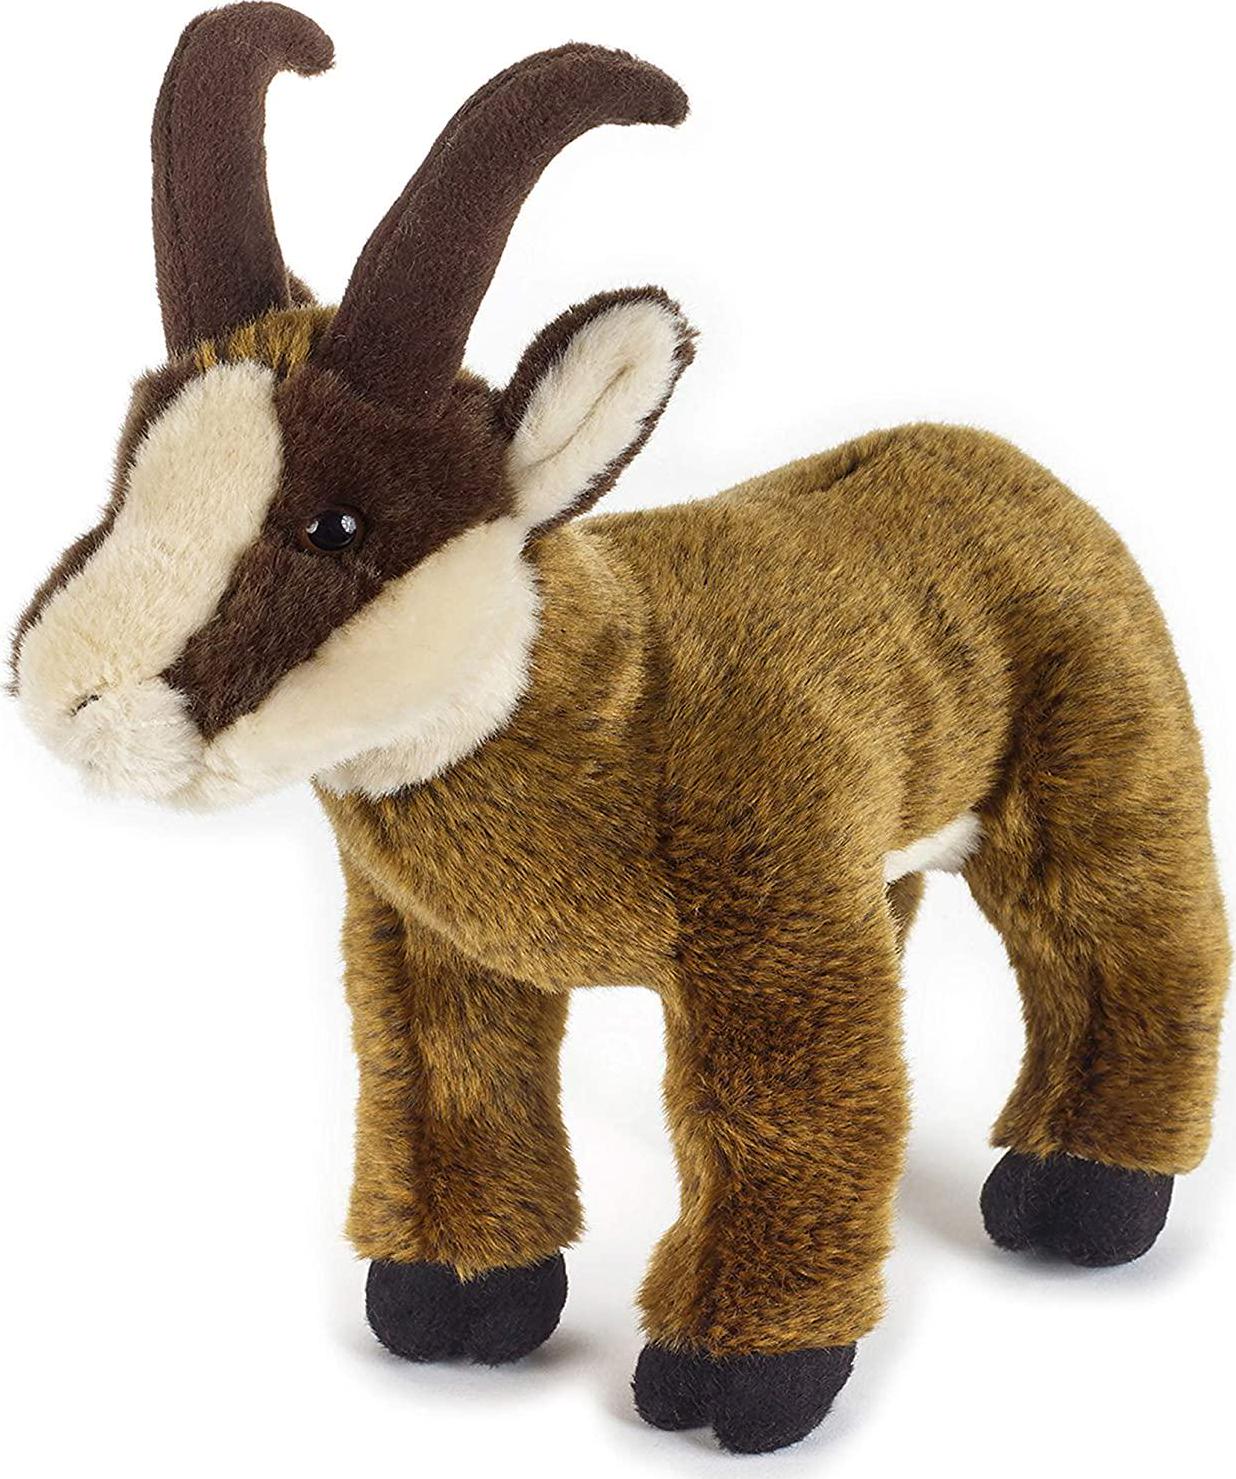 National Geographic, Lelly - National Geographic Plush, Chamois